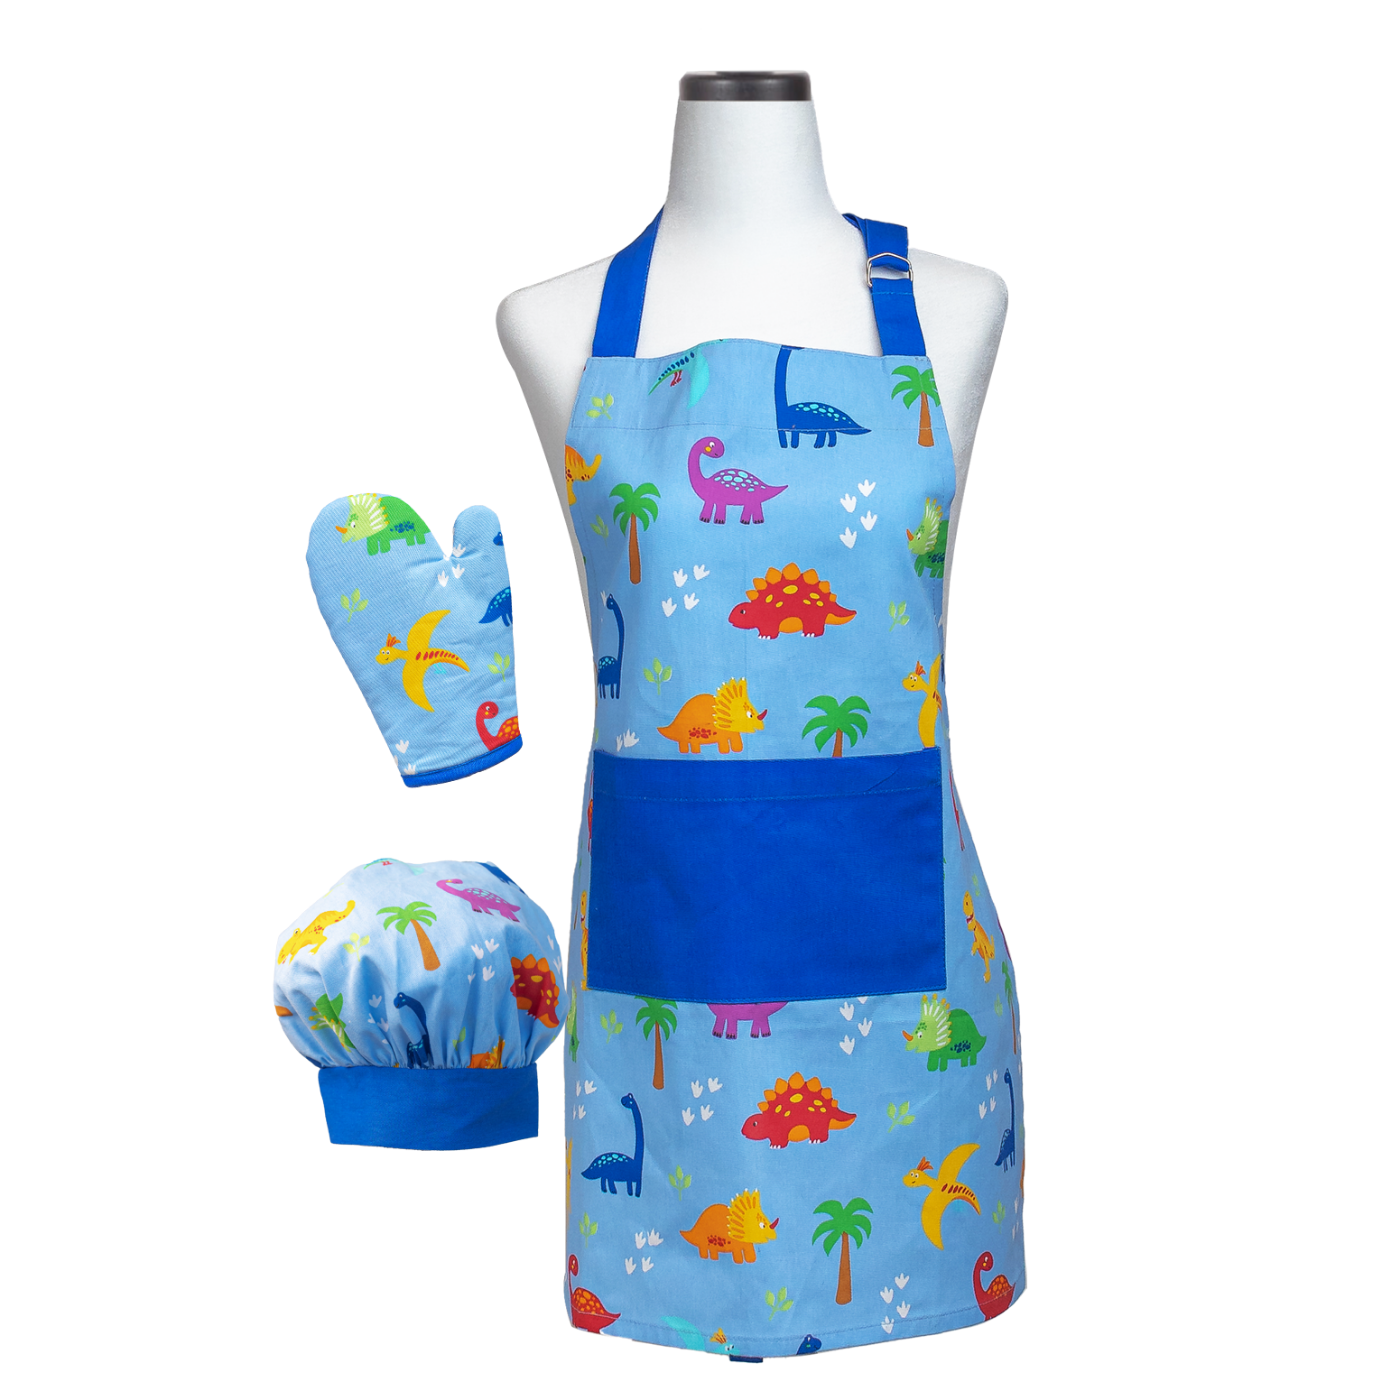 Handstand Kitchen Mother and Daughter Donut Shoppe 100% Cotton Apron Set